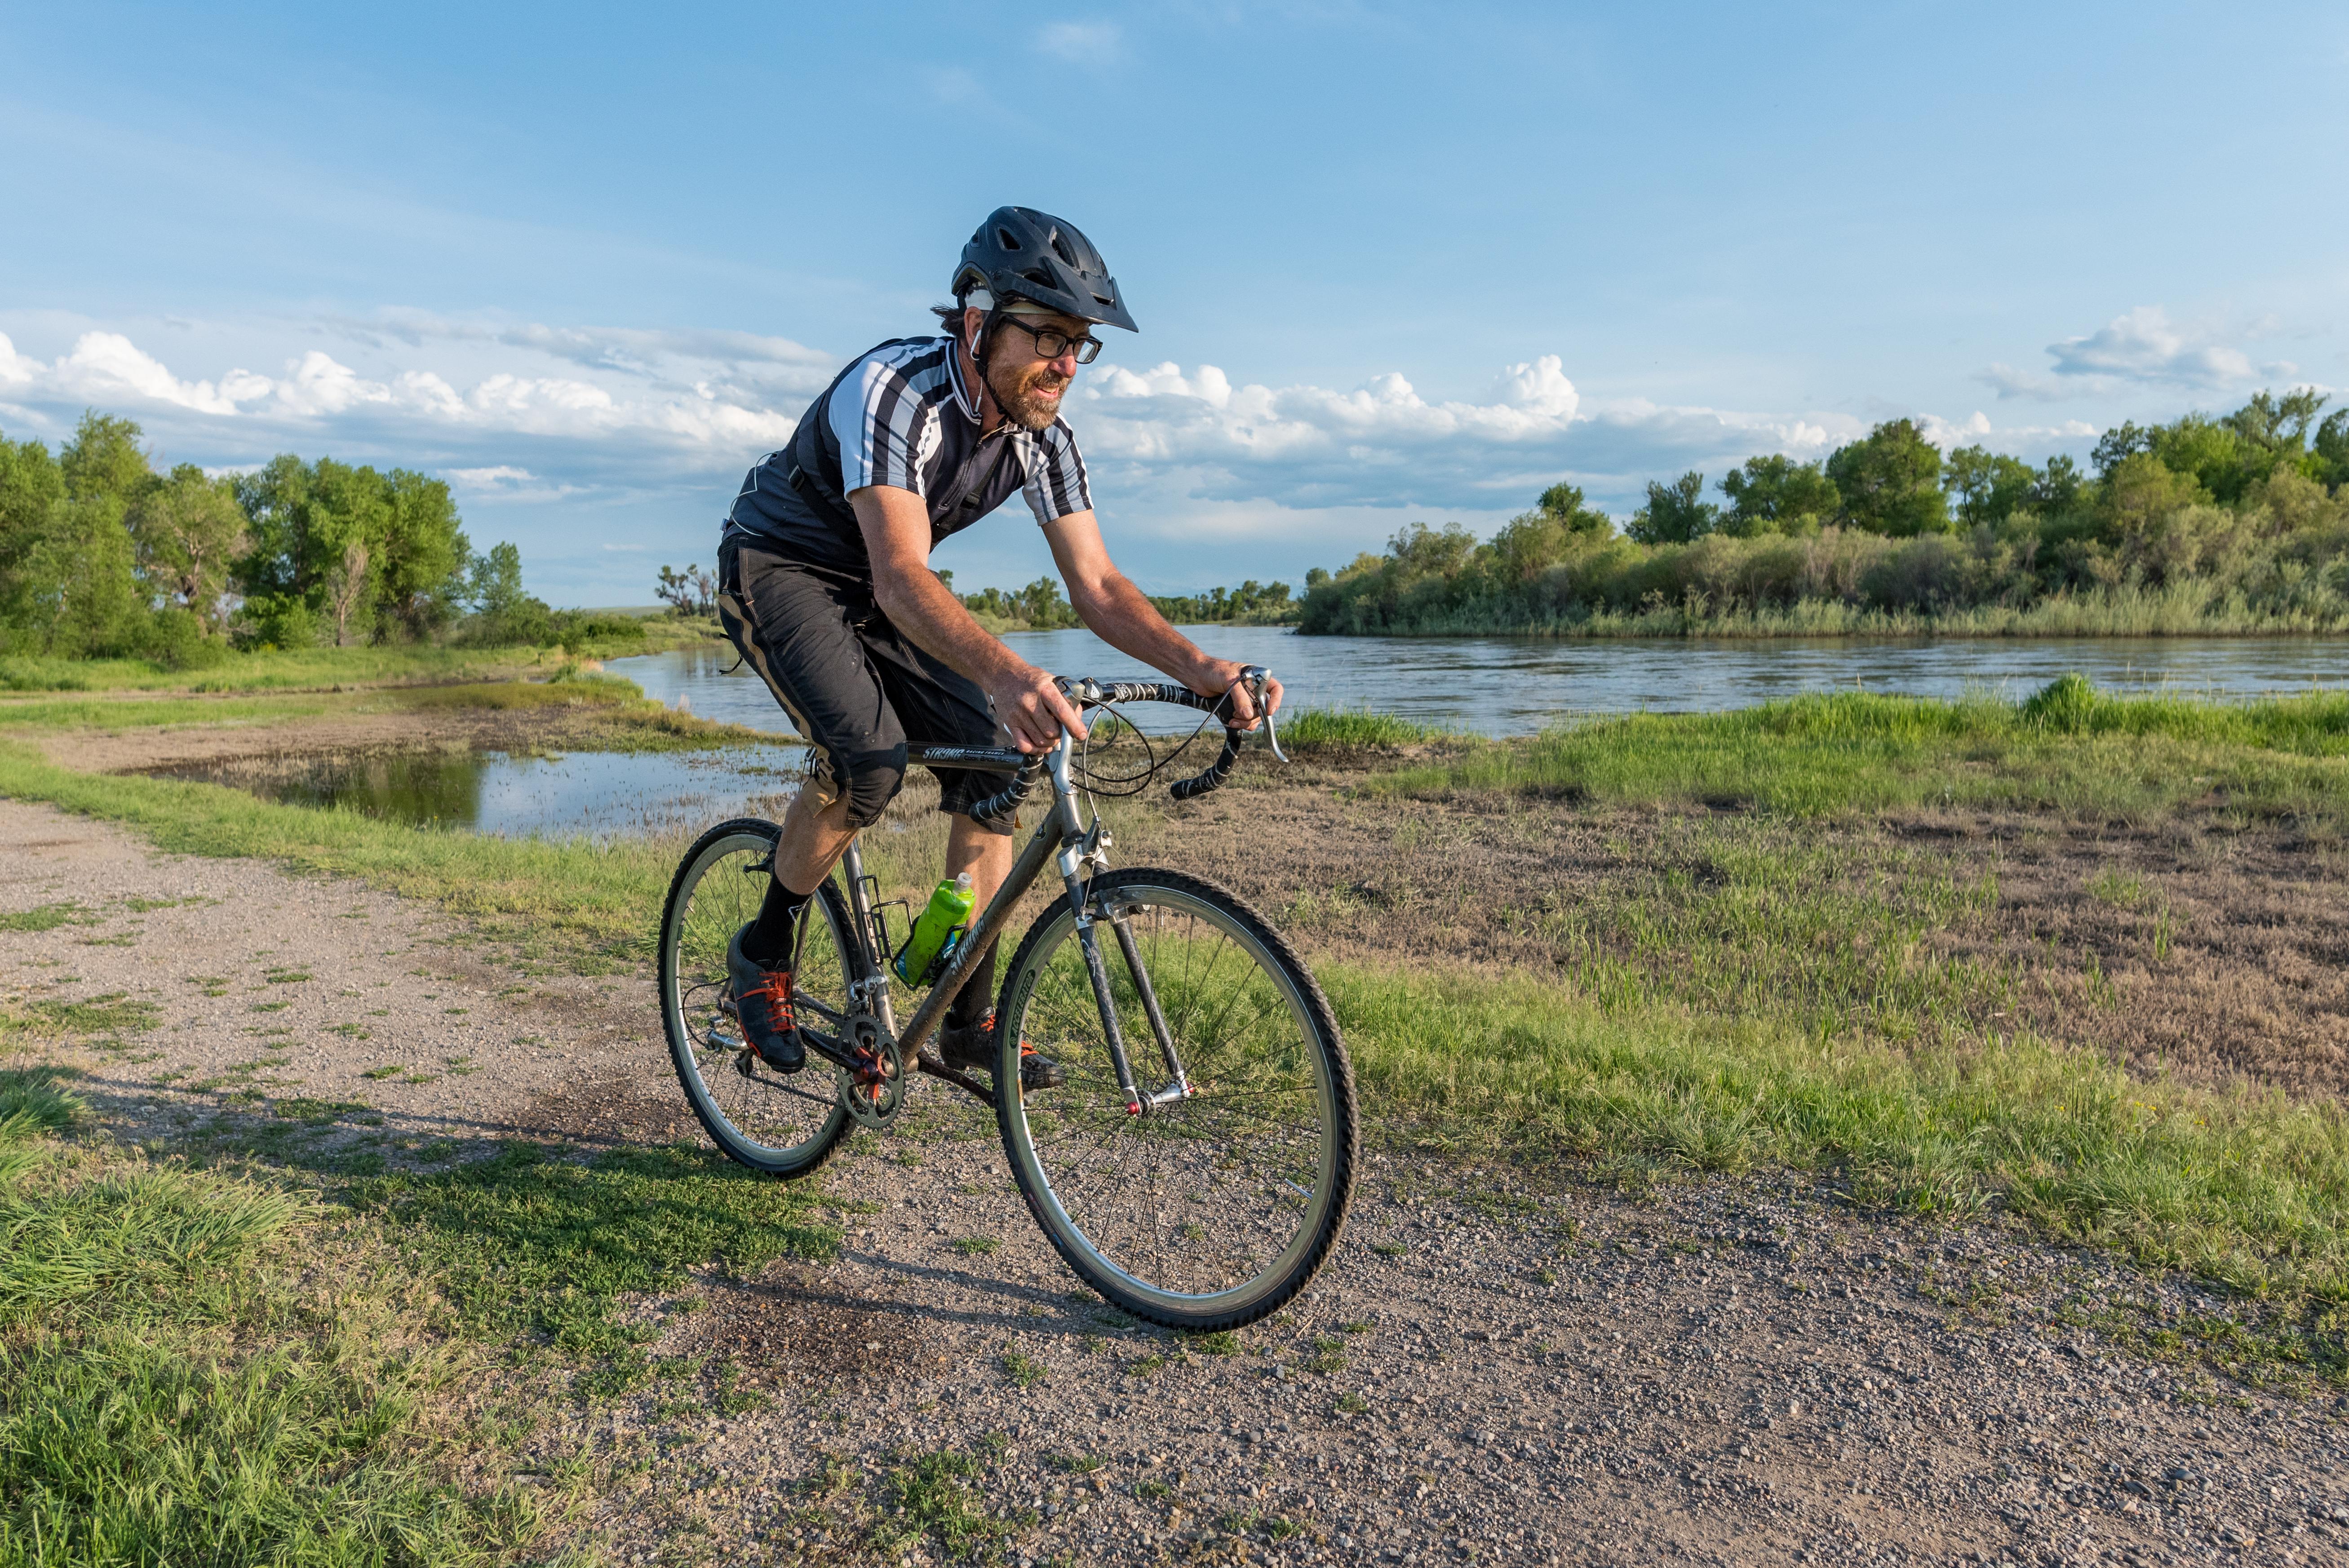 Biking the Lewis and Clark National Historic Trail